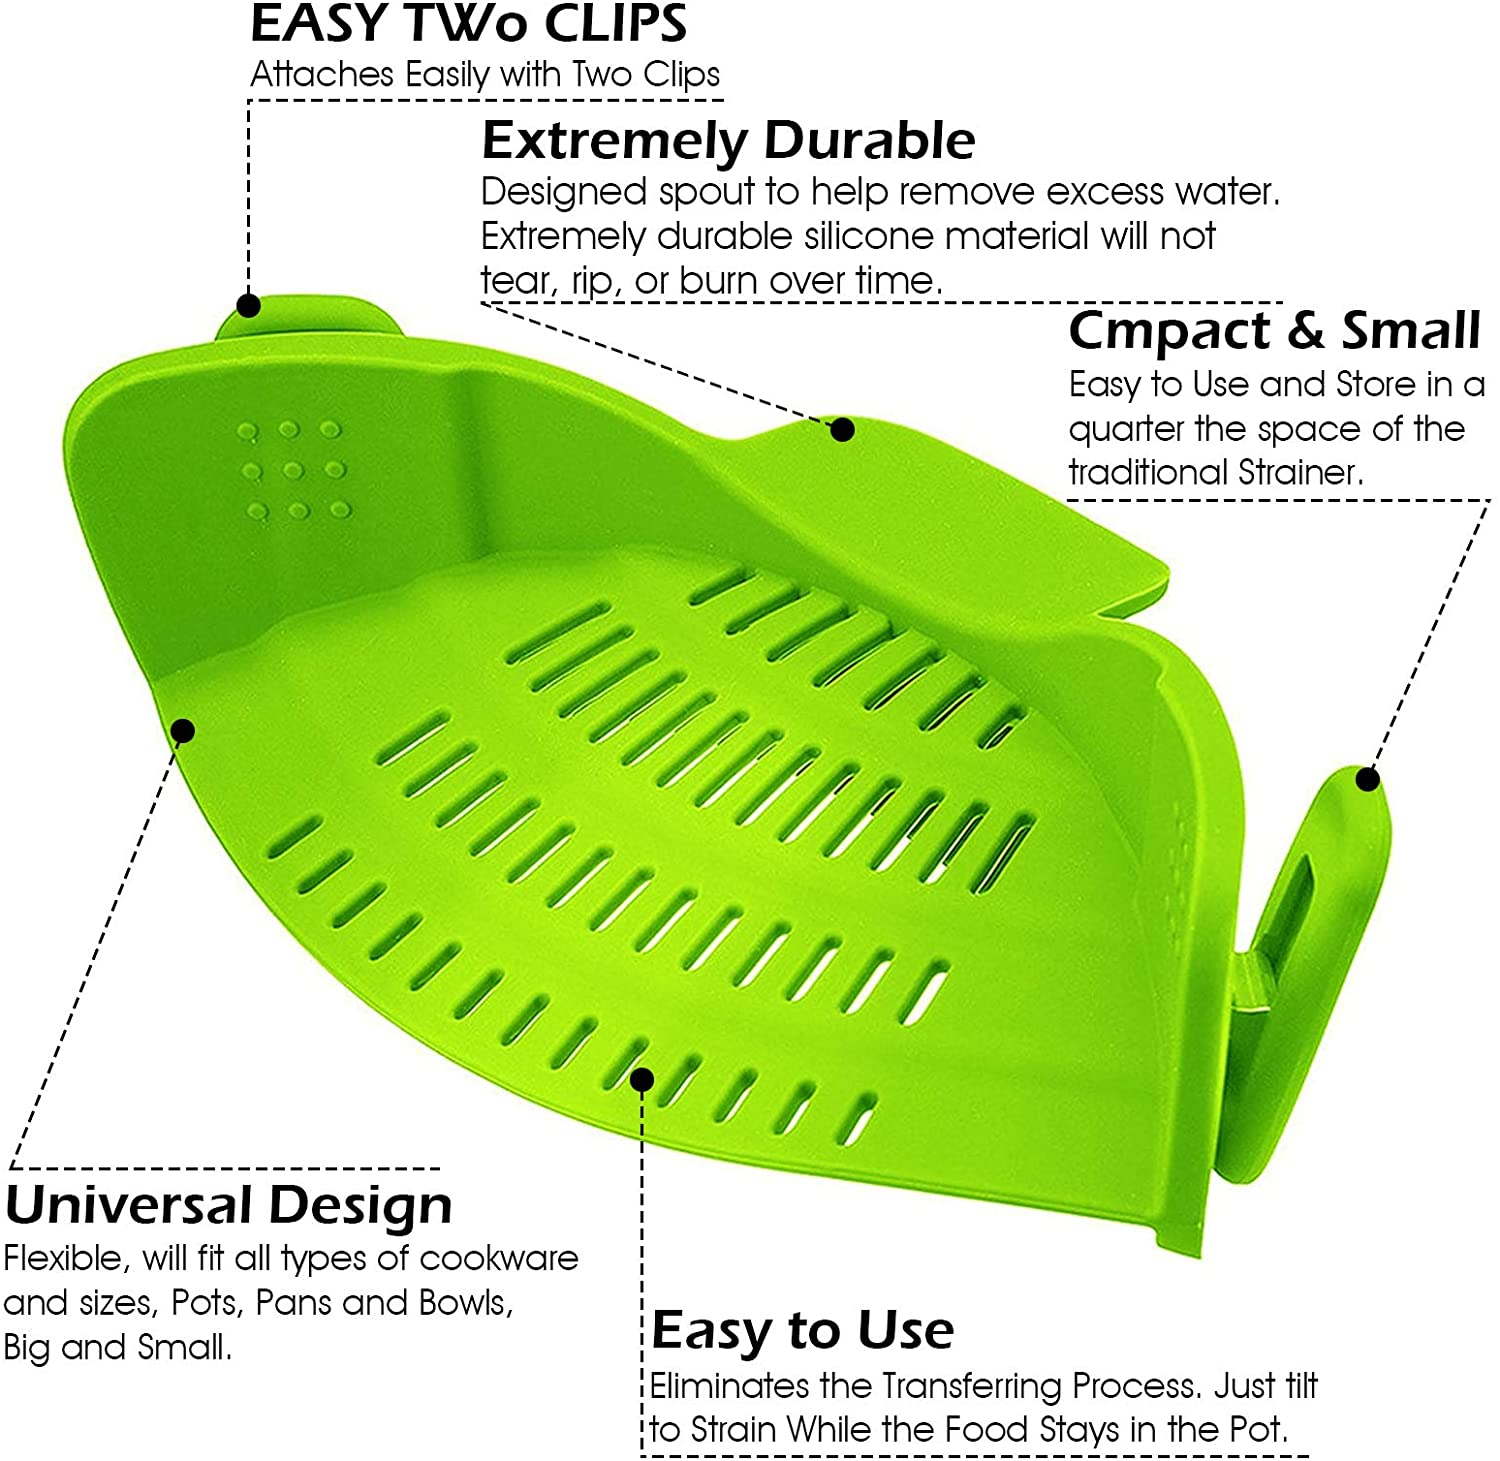 VICVEO Silicone Clip on Strainer, Patented Clip on Silicone Colander, Clip-on Kitchen Food Strainer for Pasta,Fits Almost Pots (Green) - image 3 of 8